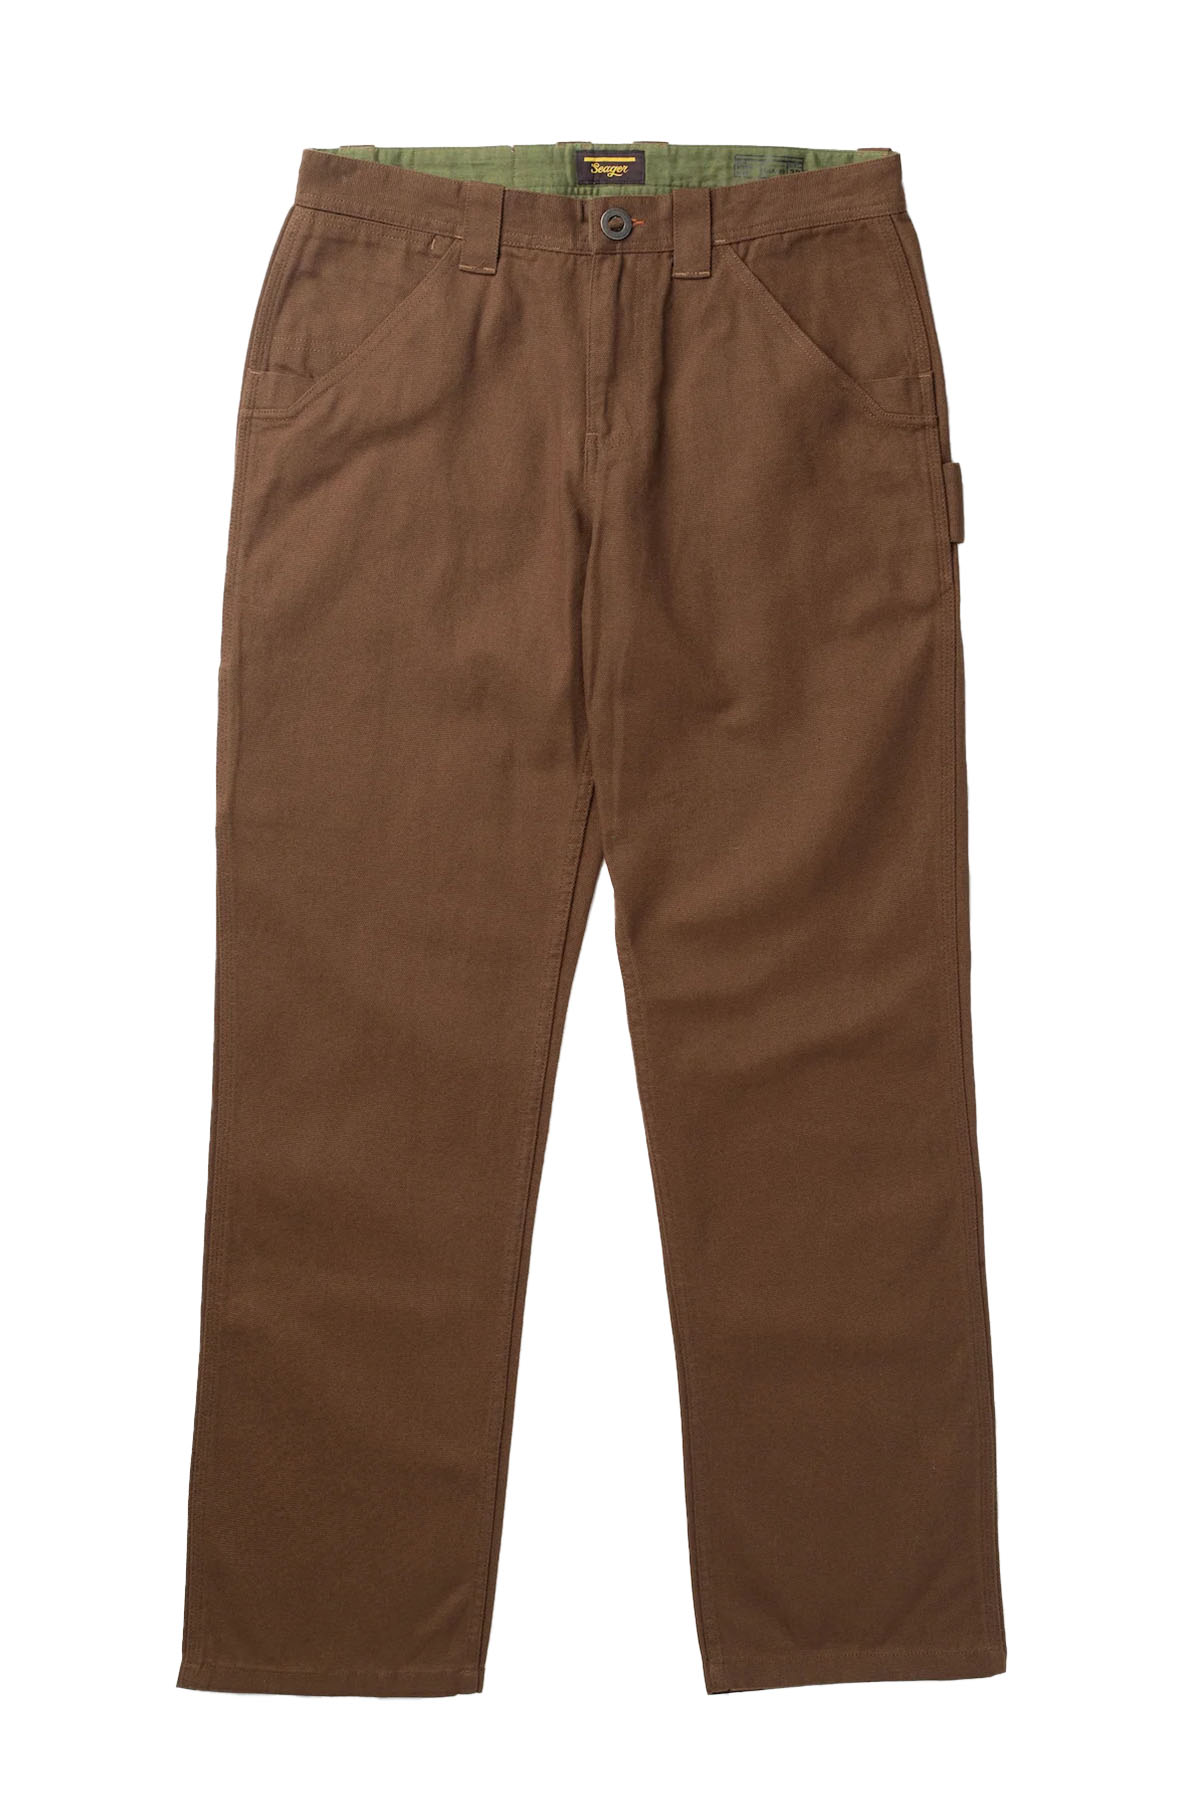 Seager - Bison Pant - Brown - Front